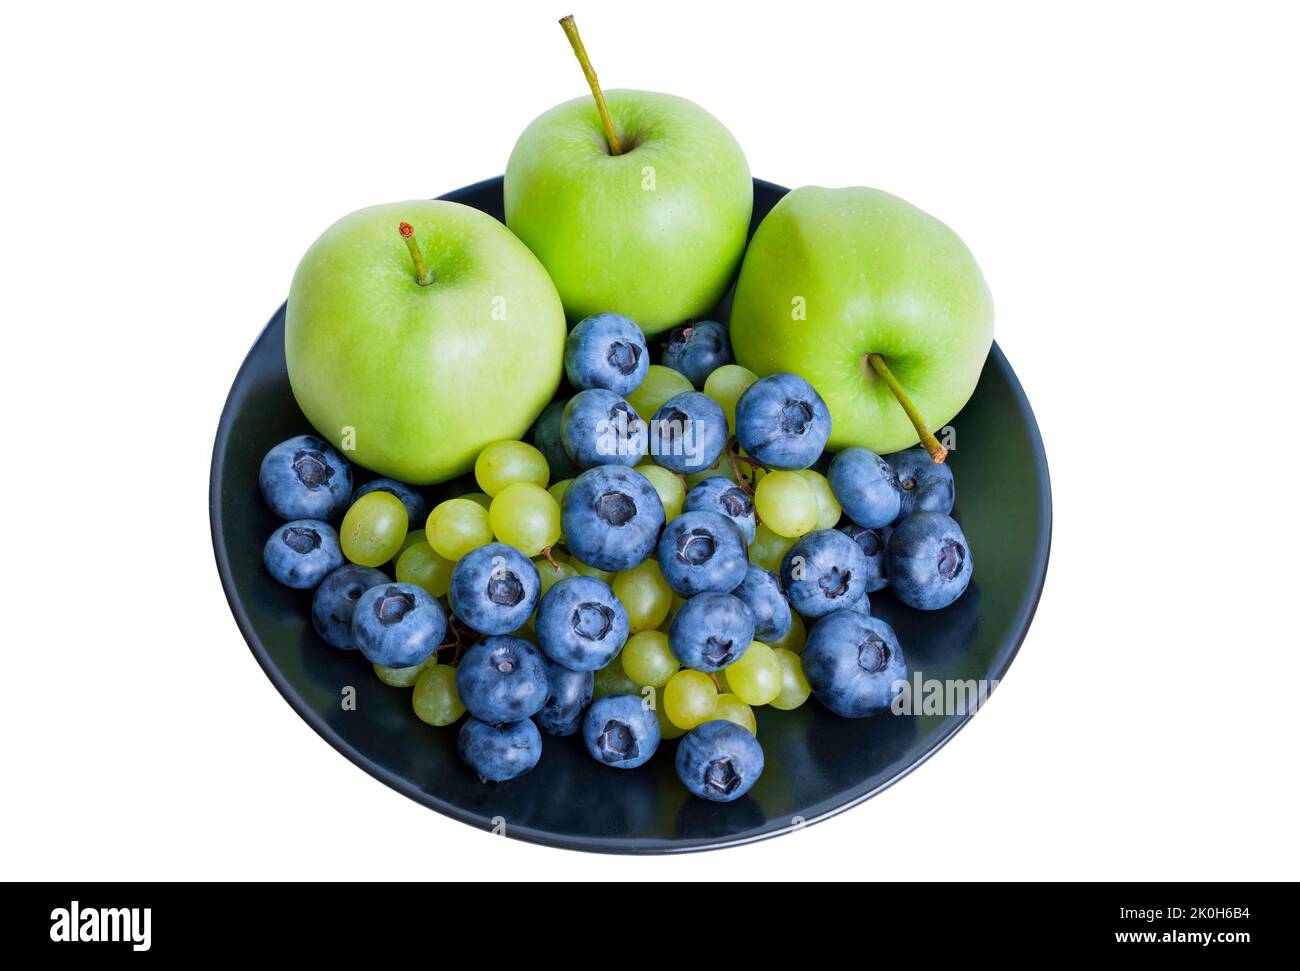 Green apples, blueberries and grapes on a black plate isolated on white Stock Photo